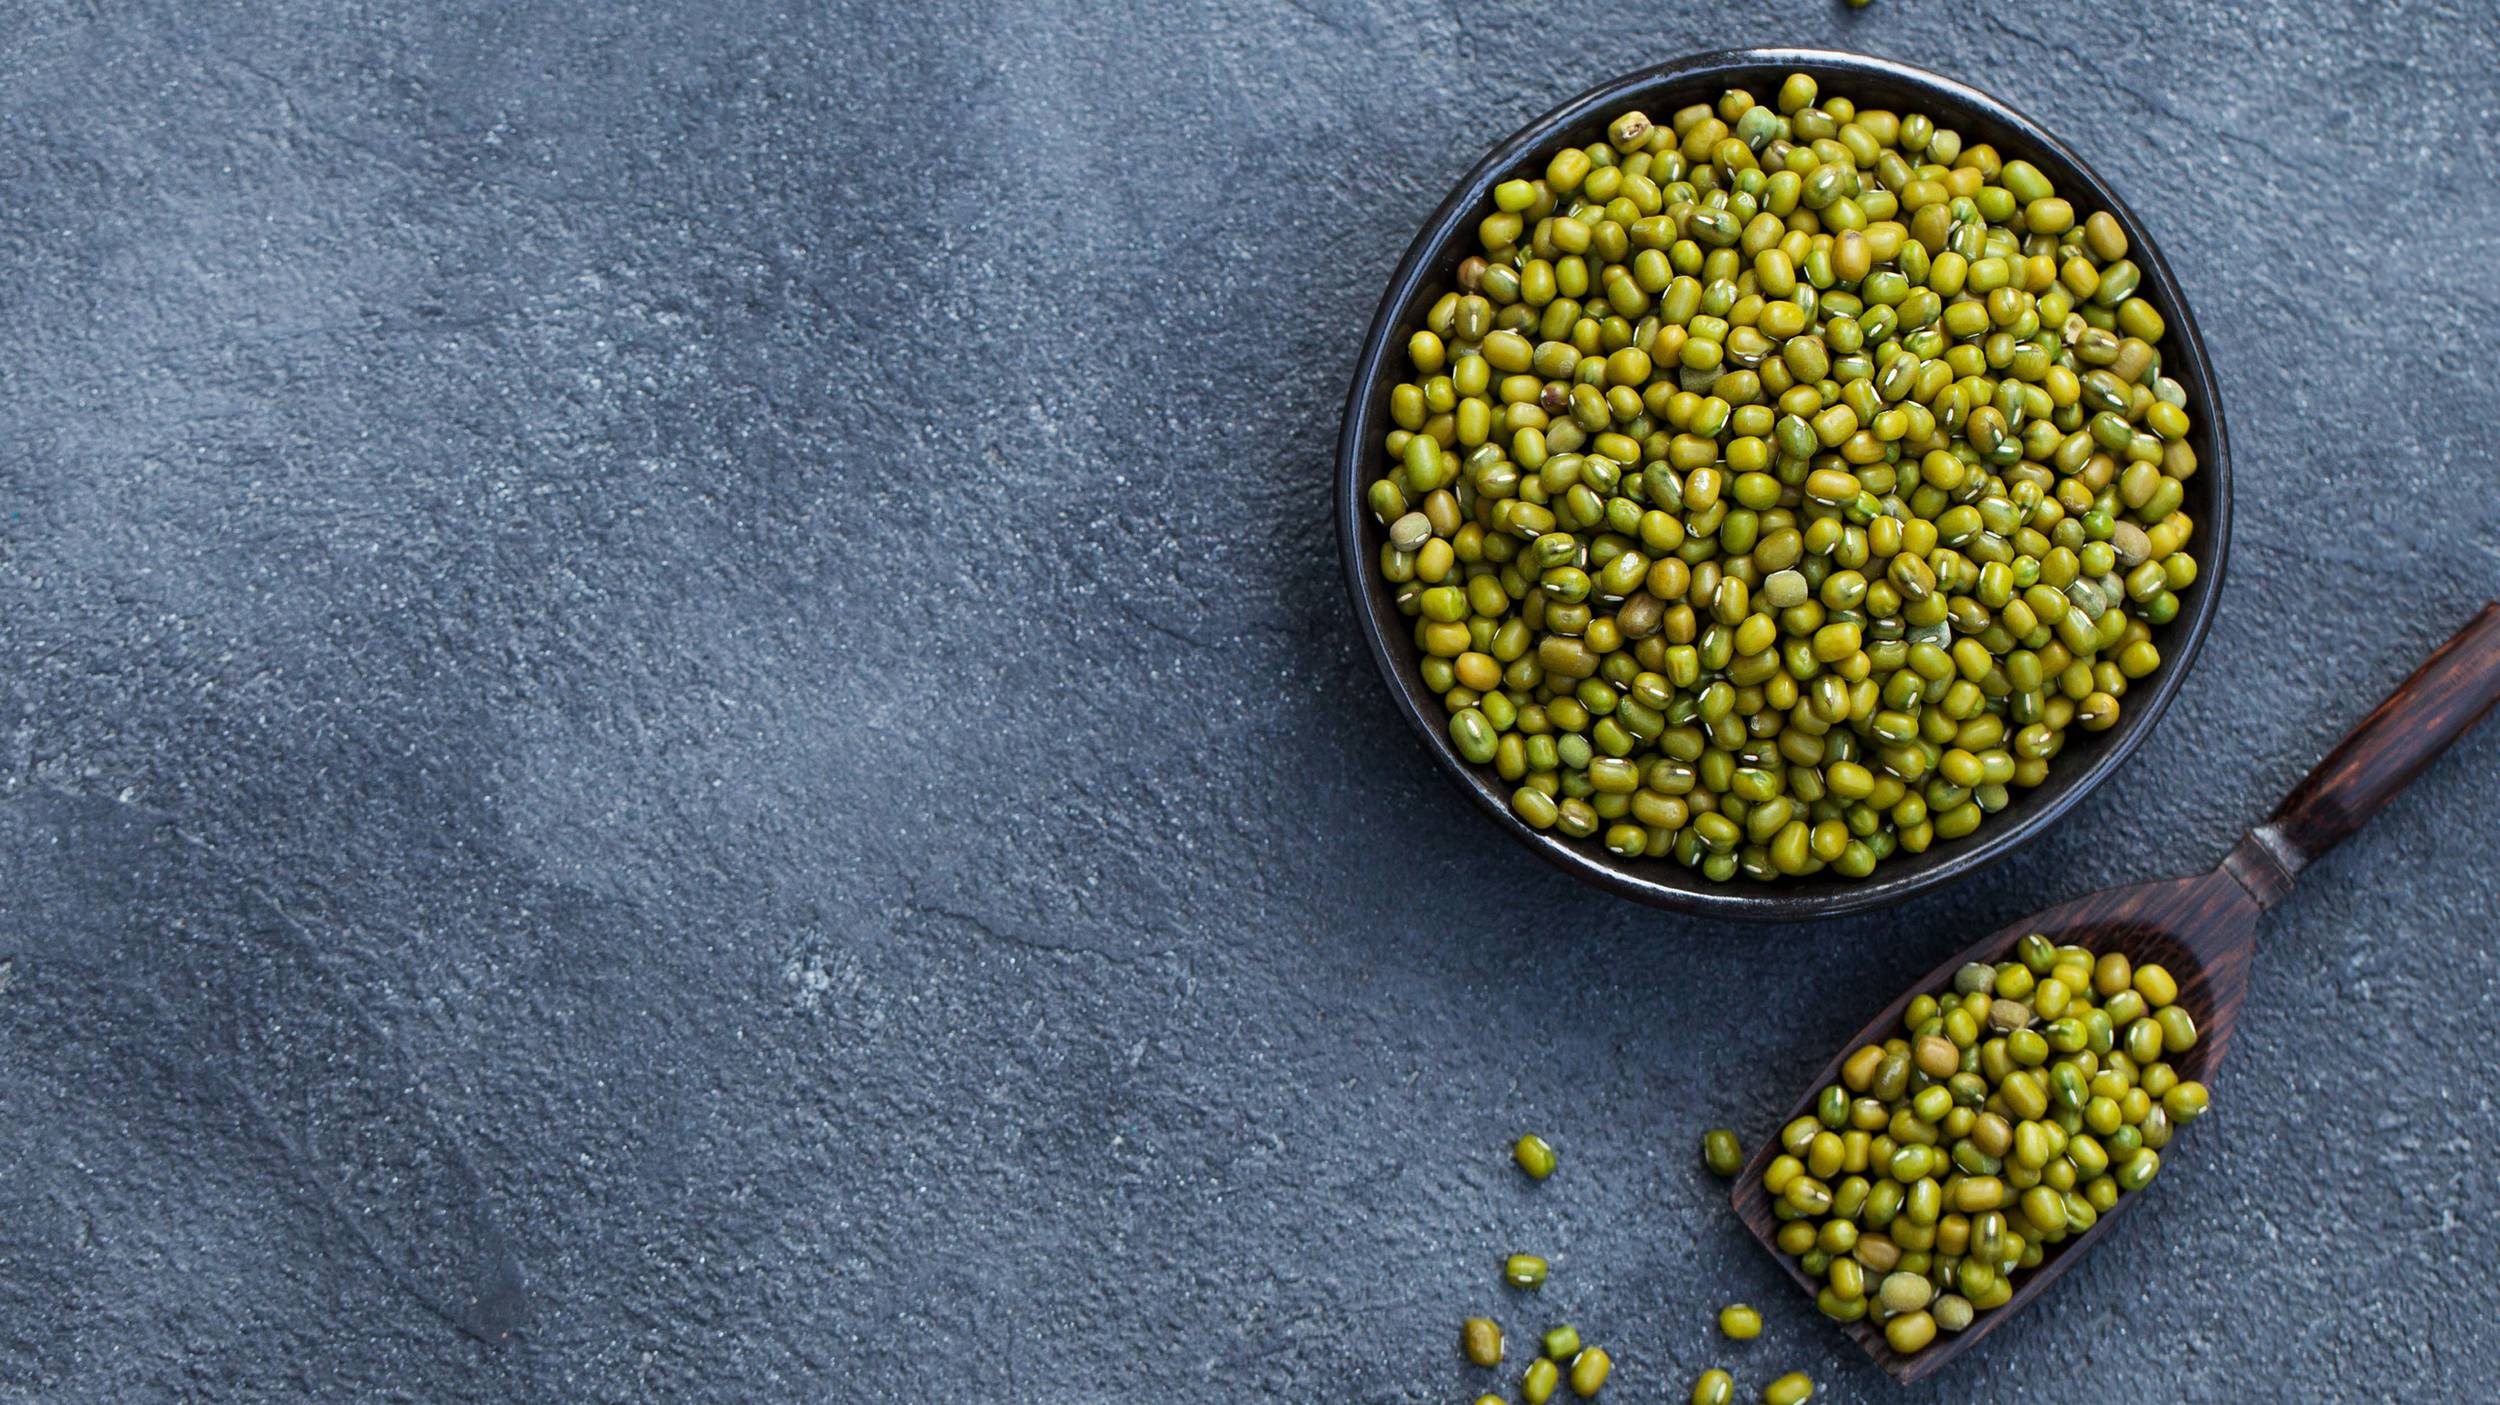 Mung beans have a slightly sweet and nutty flavour and are traditionally used in both sweet and savoury Asian dishes.